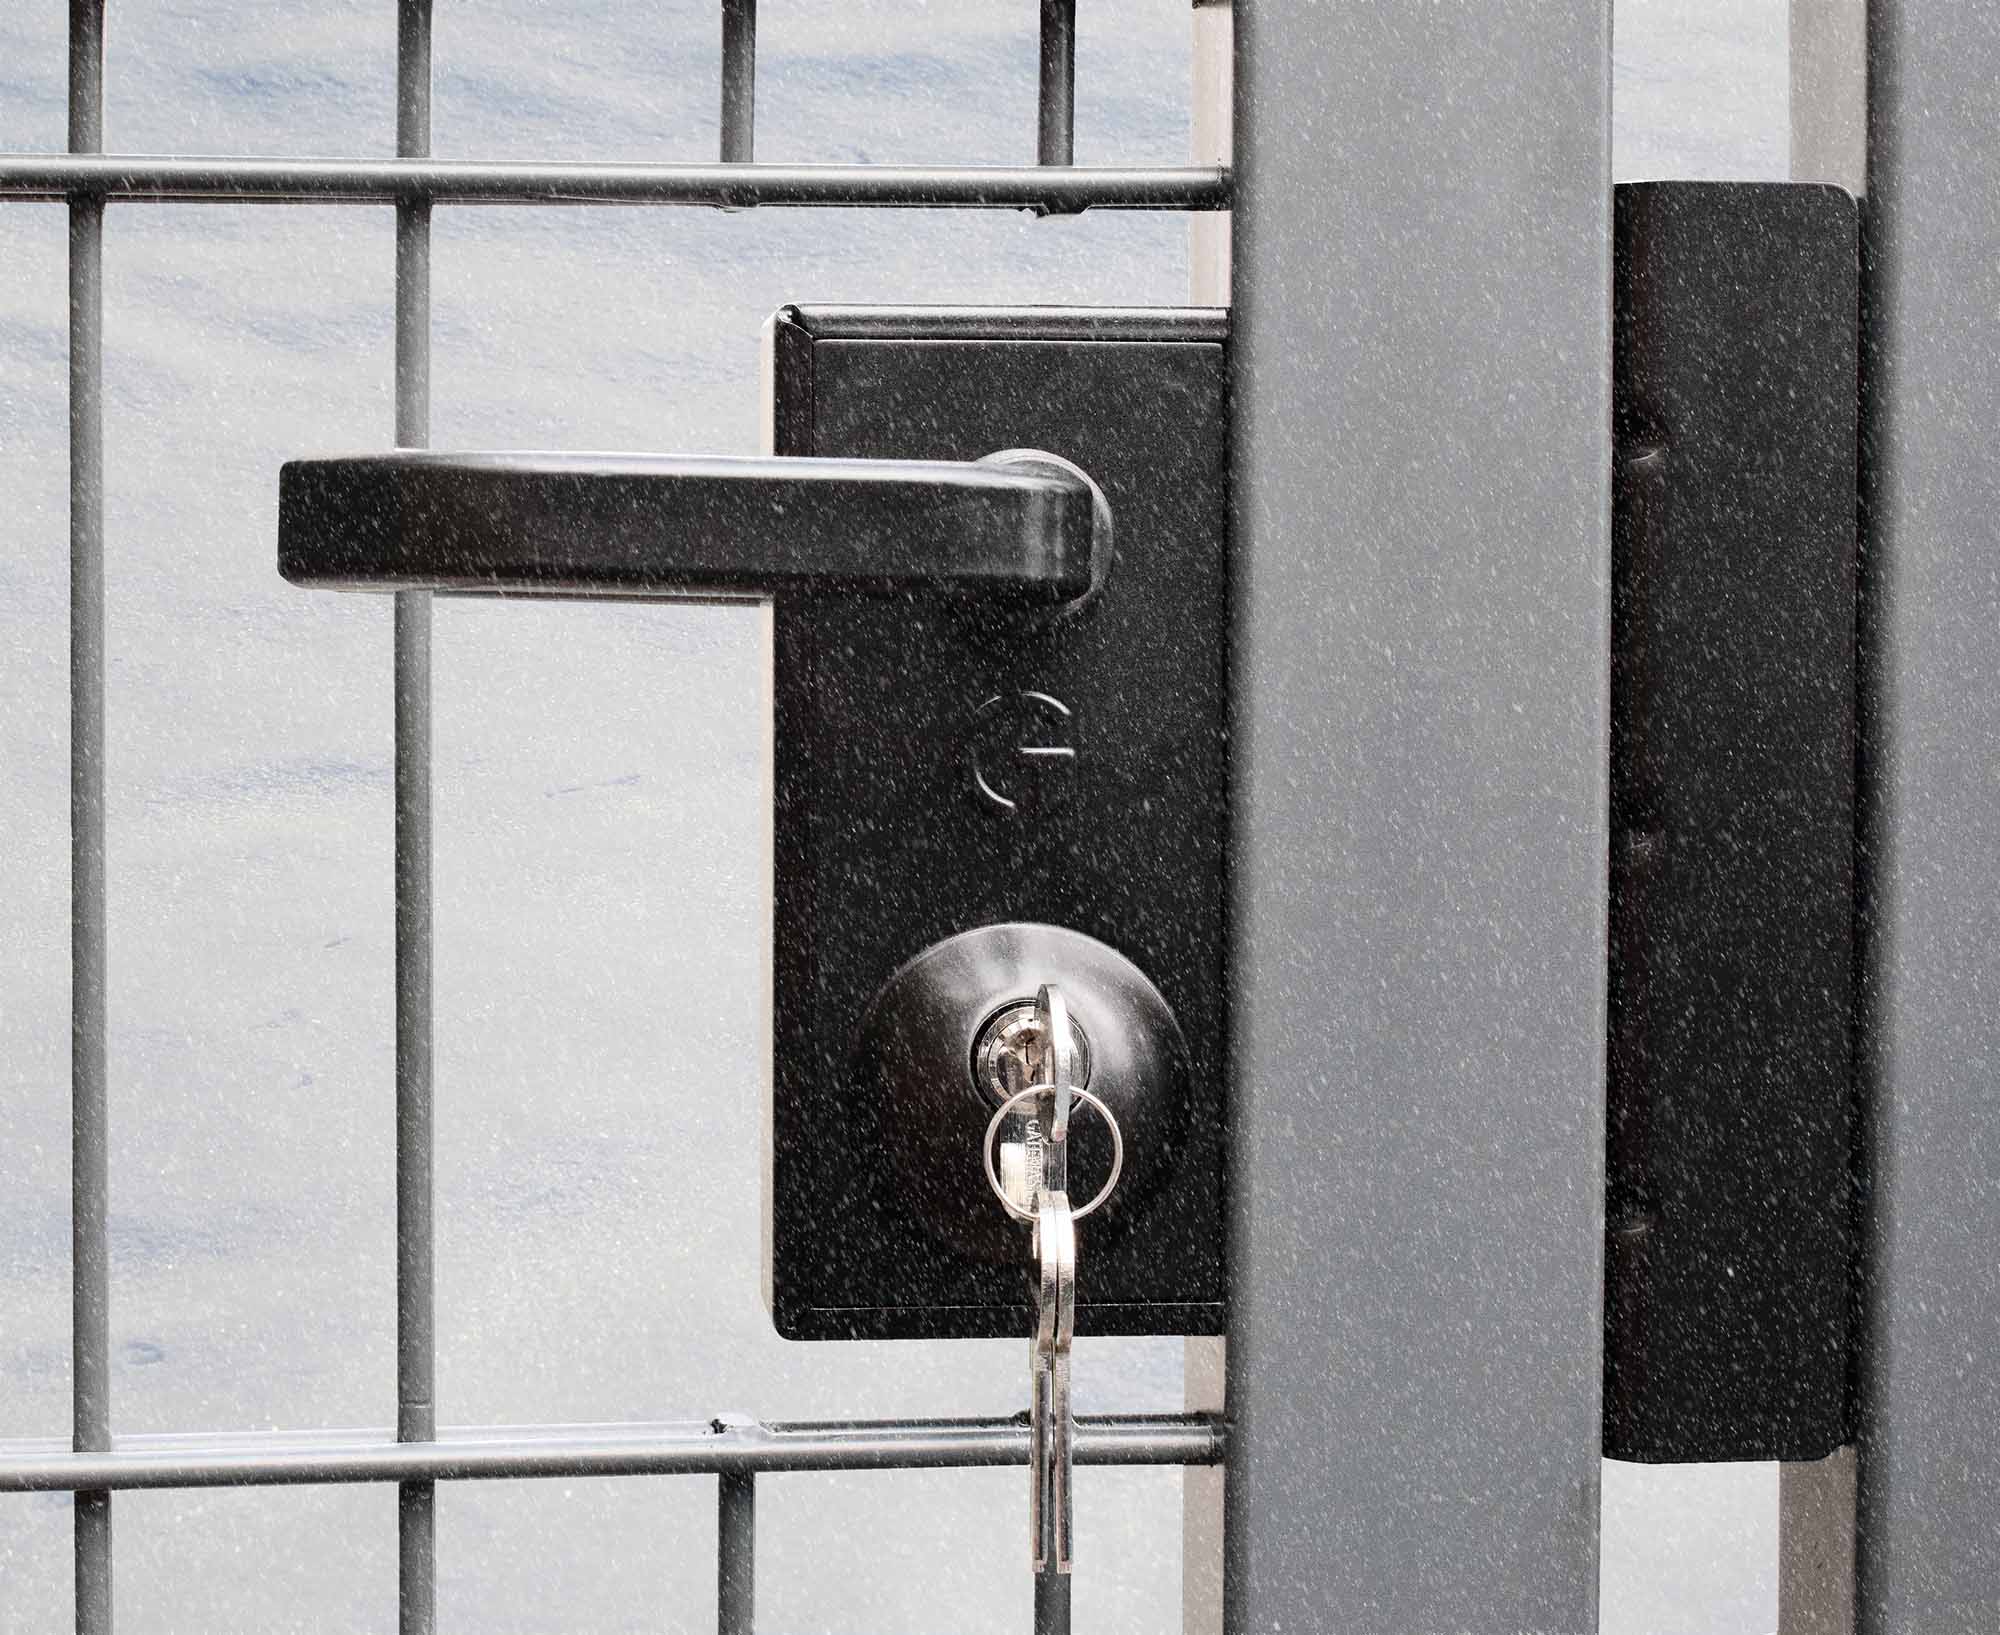 Black latch deadlock installed in metal gate. Small snowflakes in front and white snow banks behind the gate